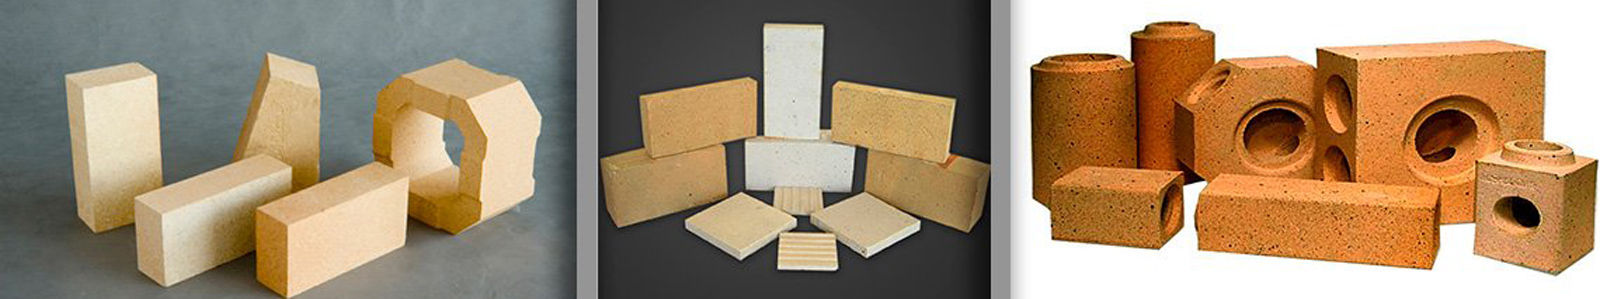 Refractory-bricks-of-different-shapes